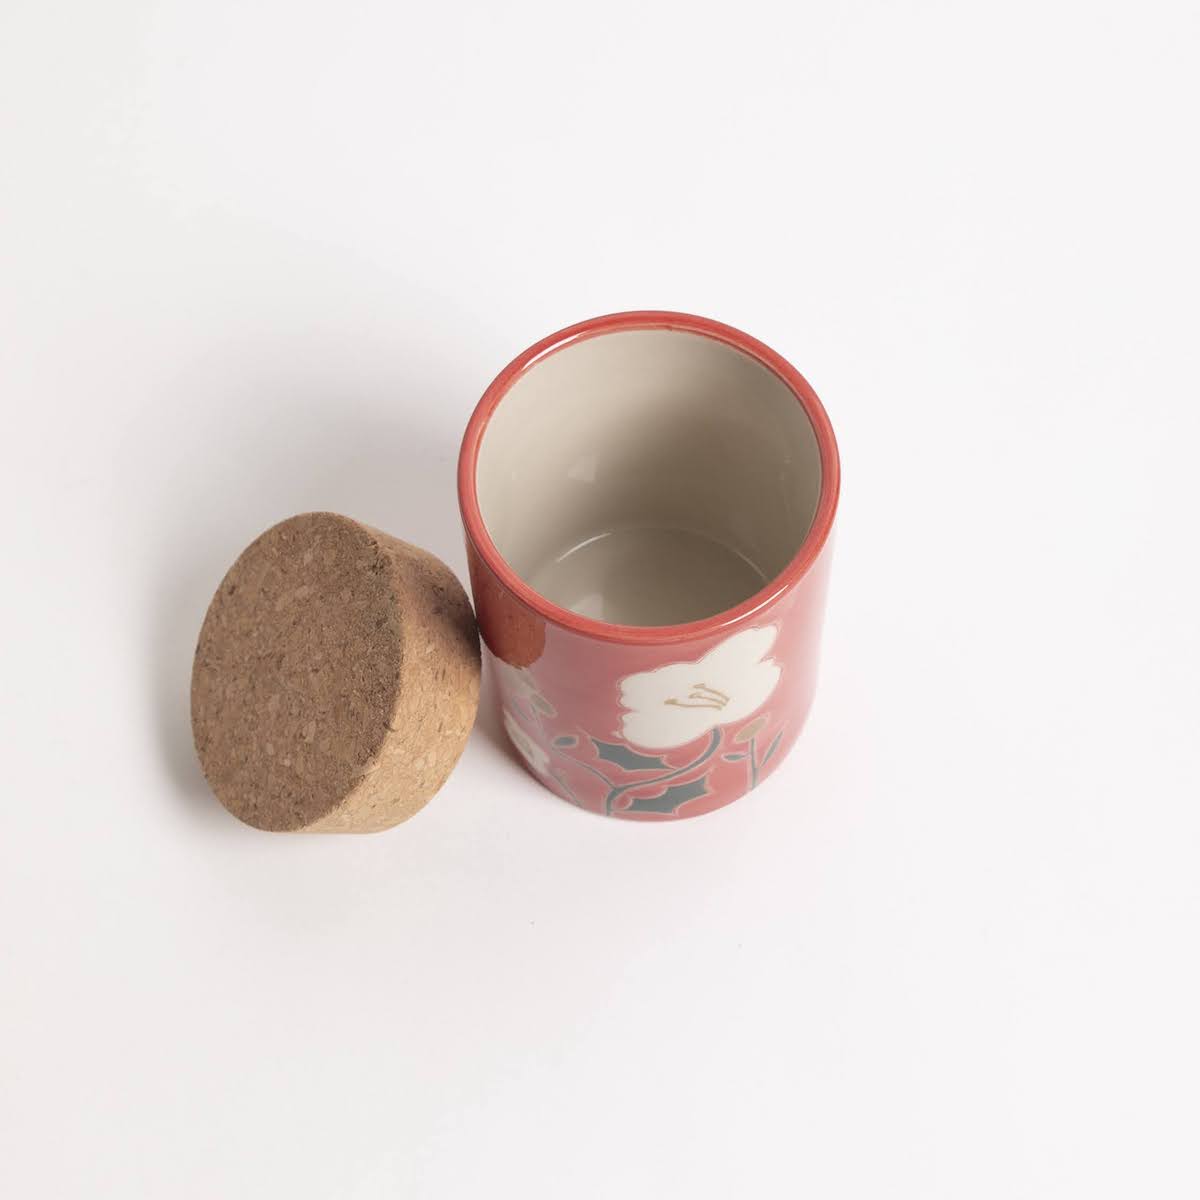 Peony Ceramic Canister with Cork Lid - P I C N I C 